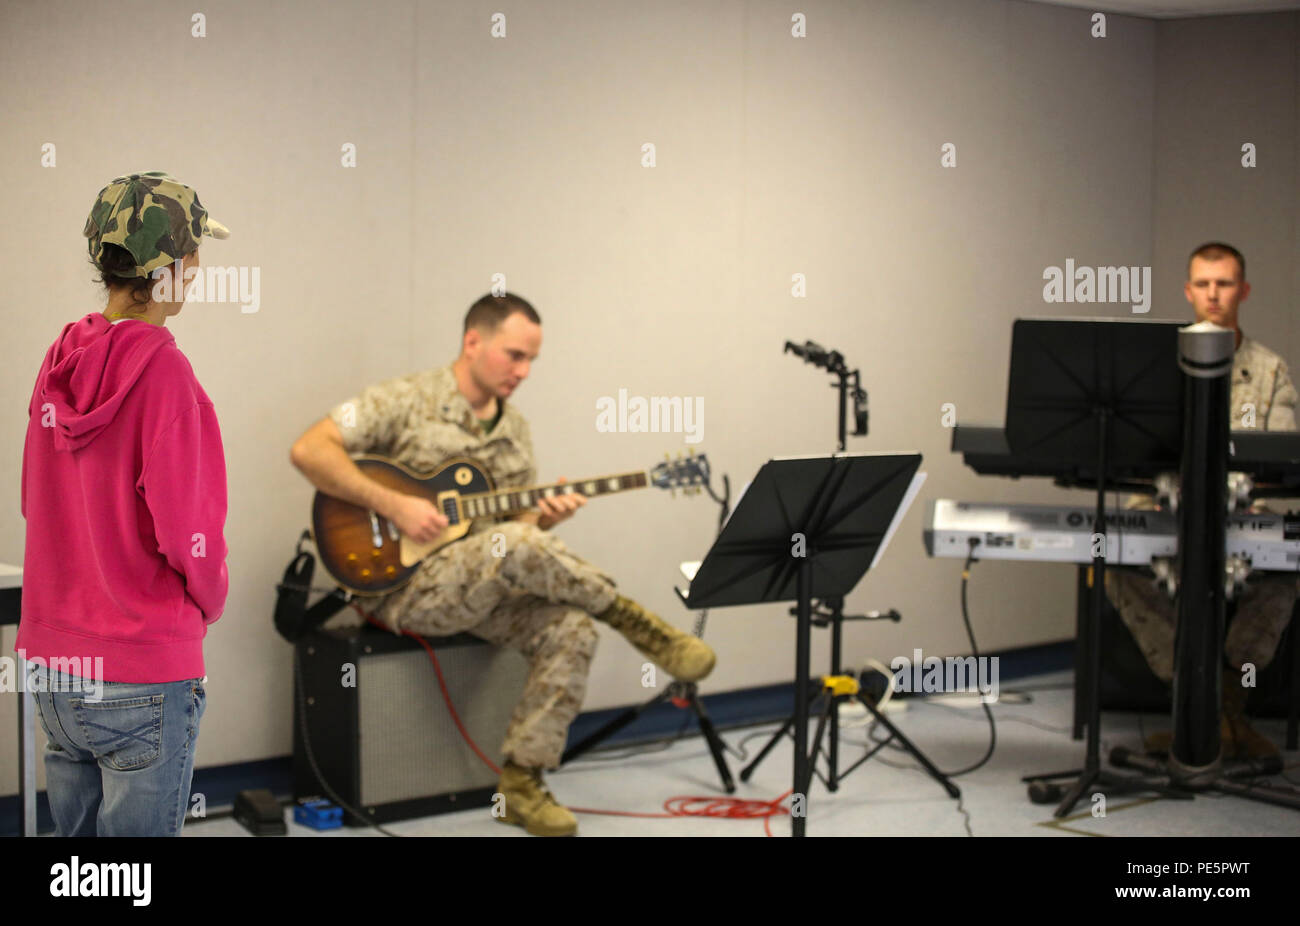 Amber N. Carter, right, a resident of Hubert, N.C., watches members of the 2nd Marine Division Band conduct rehearsal at the band’s command post at Camp Lejeune, N.C., Sept. 29, 2015. Amber always dreamed of joining the Marine Corps, but could not due to William’s syndrome. Staff Sgt. Isaiah Riley, a Marine with 10th Marine Regiment, brought her and her family aboard the base to watch the band play. (U.S. Marine Corps photo by Cpl. Paul S. Martinez/Released) Stock Photo